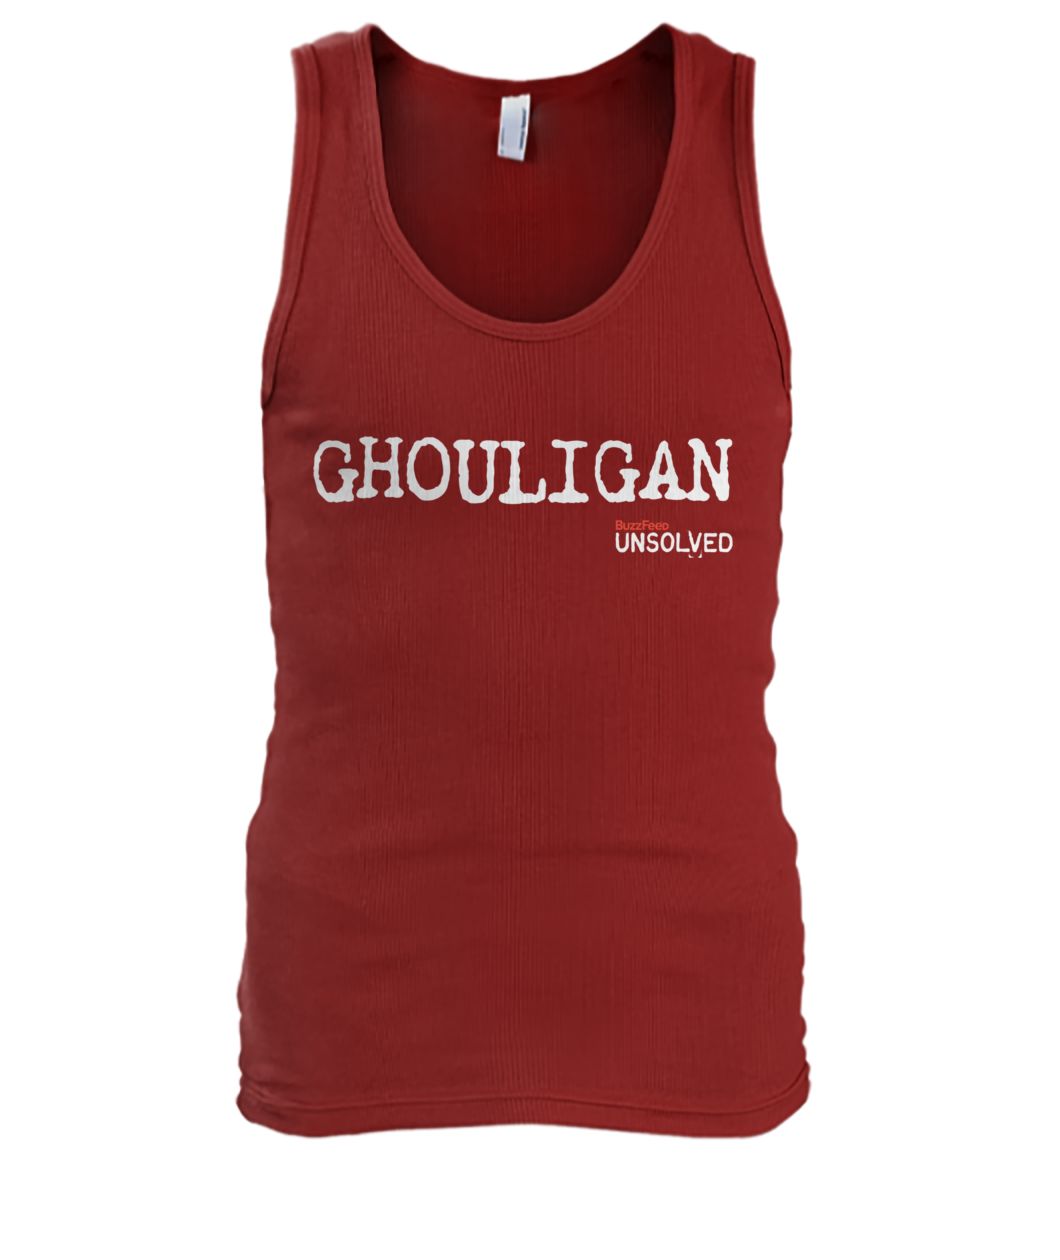 Buzzfeed unsolved ghouligan men's tank top